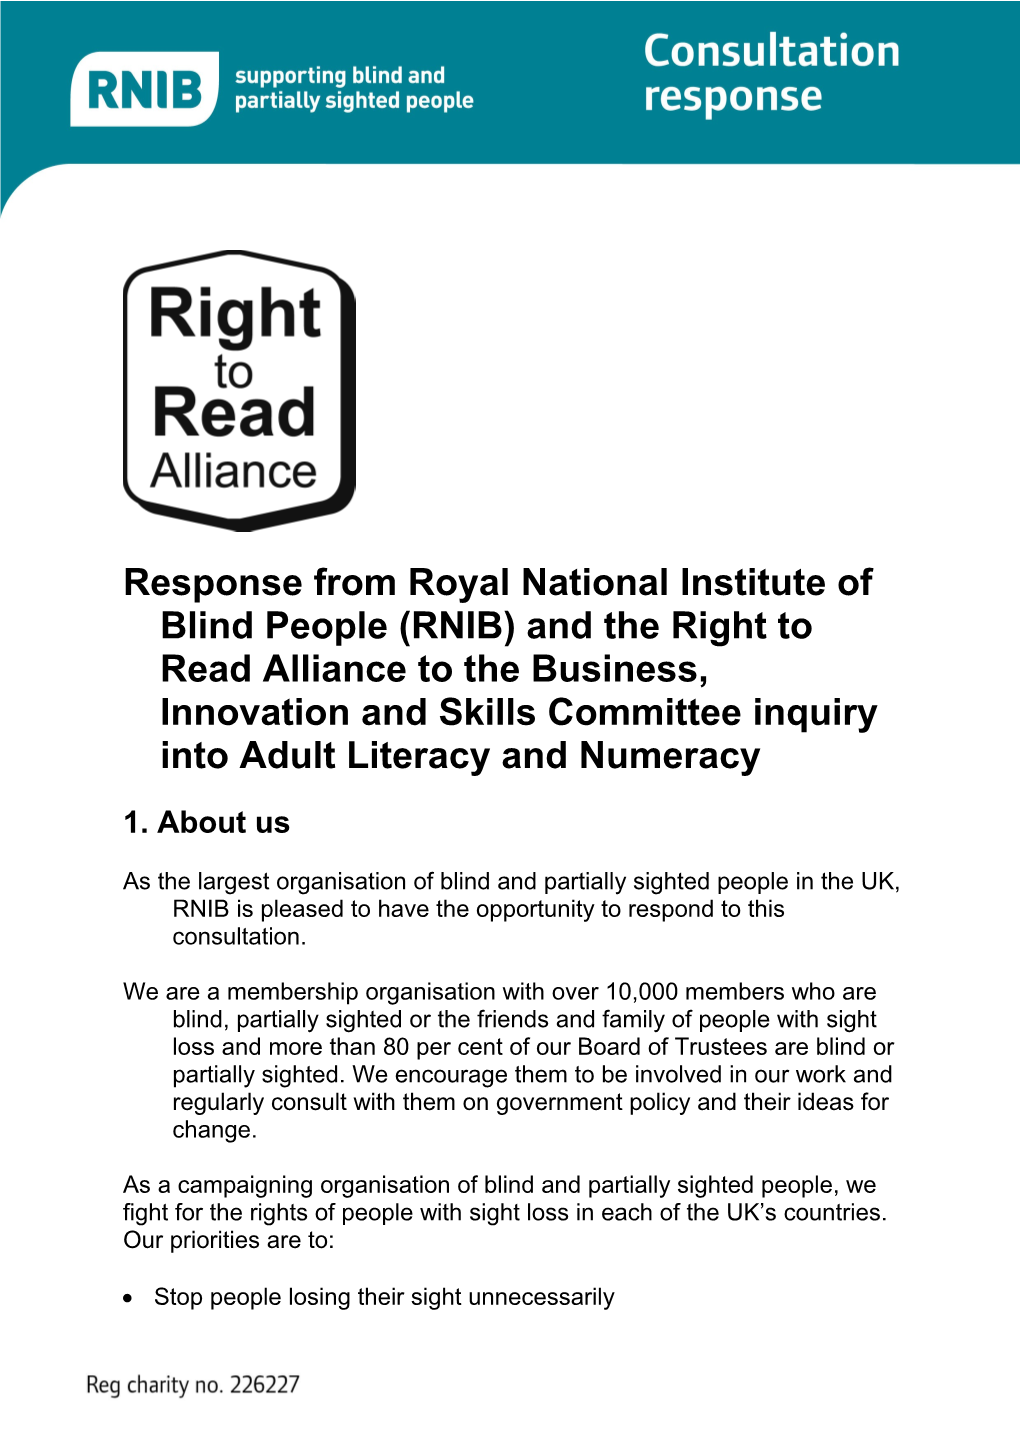 Response from Royal National Institute of Blind People (RNIB)